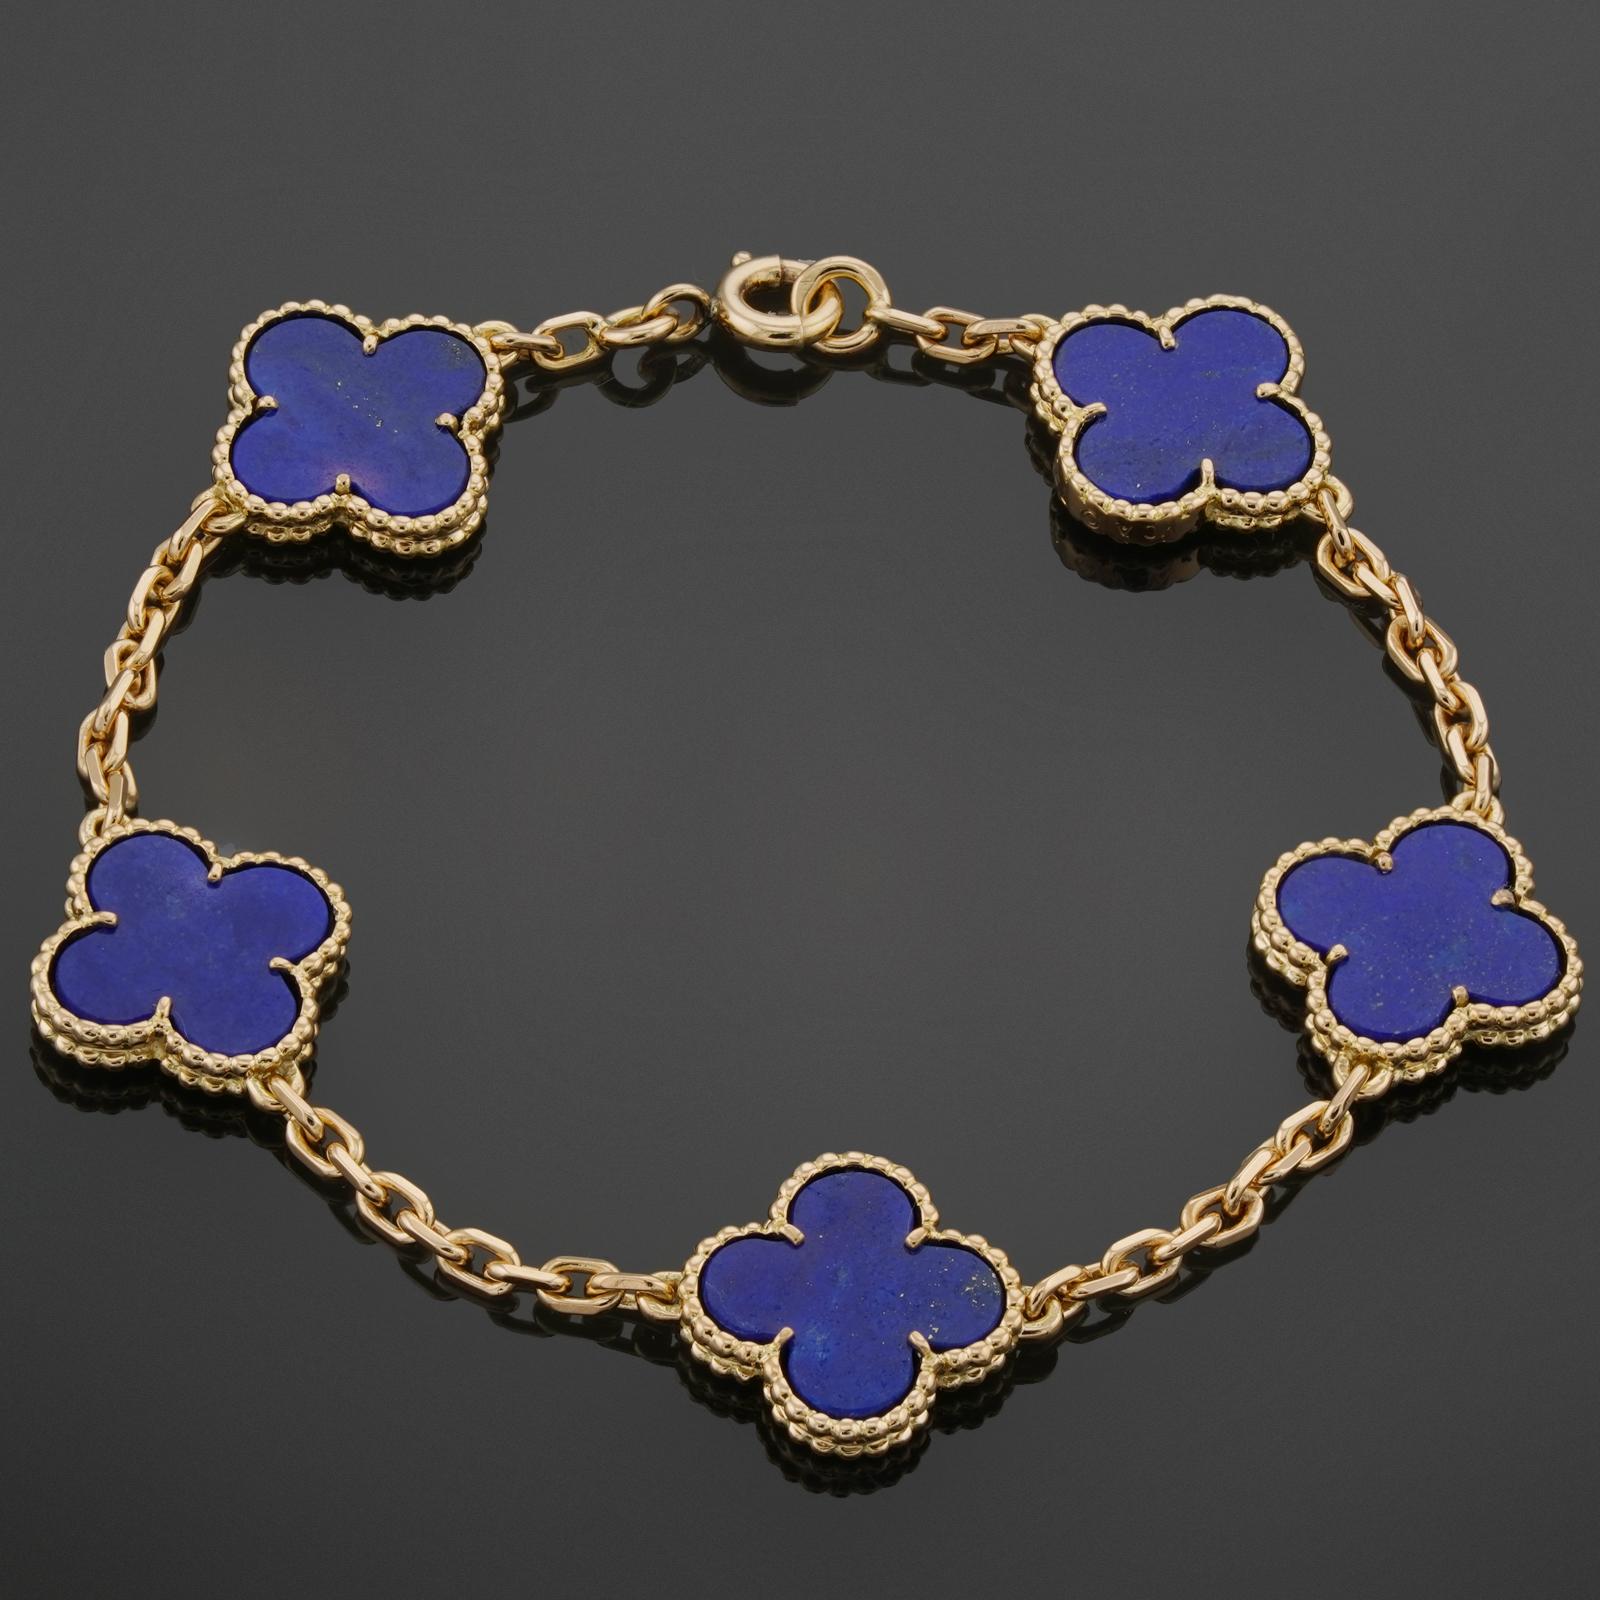 This rare Van Cleef & Arpels bracelet from the classic Vintage Alhambra collection is crafted in 18k yellow gold and features 5 lucky clover motifs inlaid with blue lapiz lazuli in round bead settings. Made in France circa 1980s. Measurements: 0.59